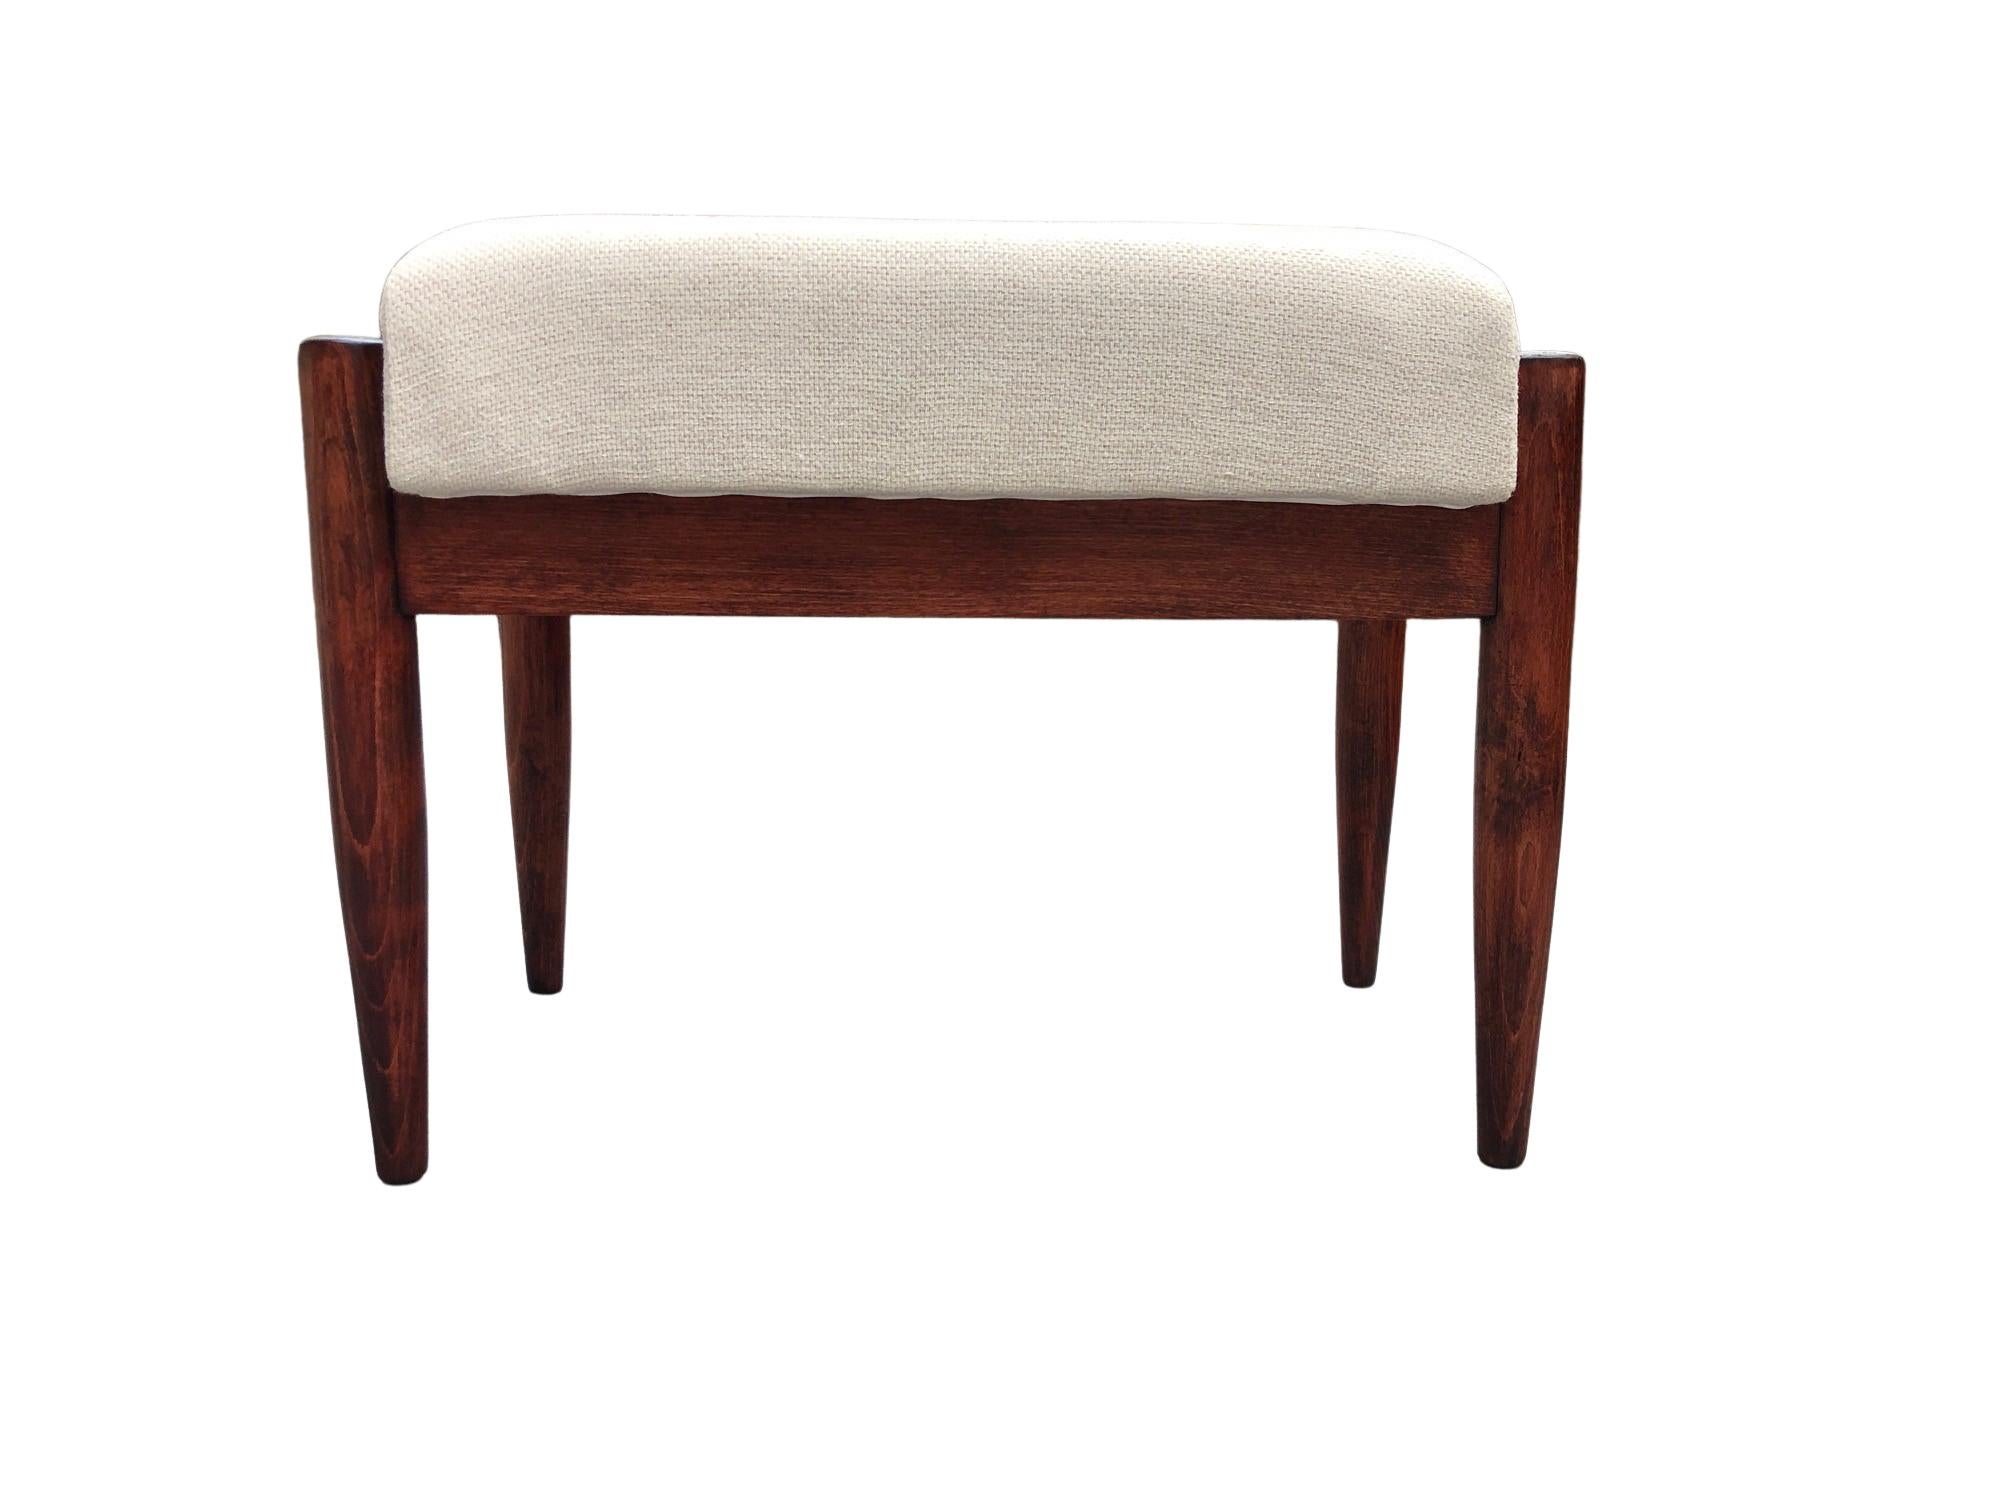 Cotton Mid-Century Wood Stool in Beige, Edmund Homa, 1960s For Sale